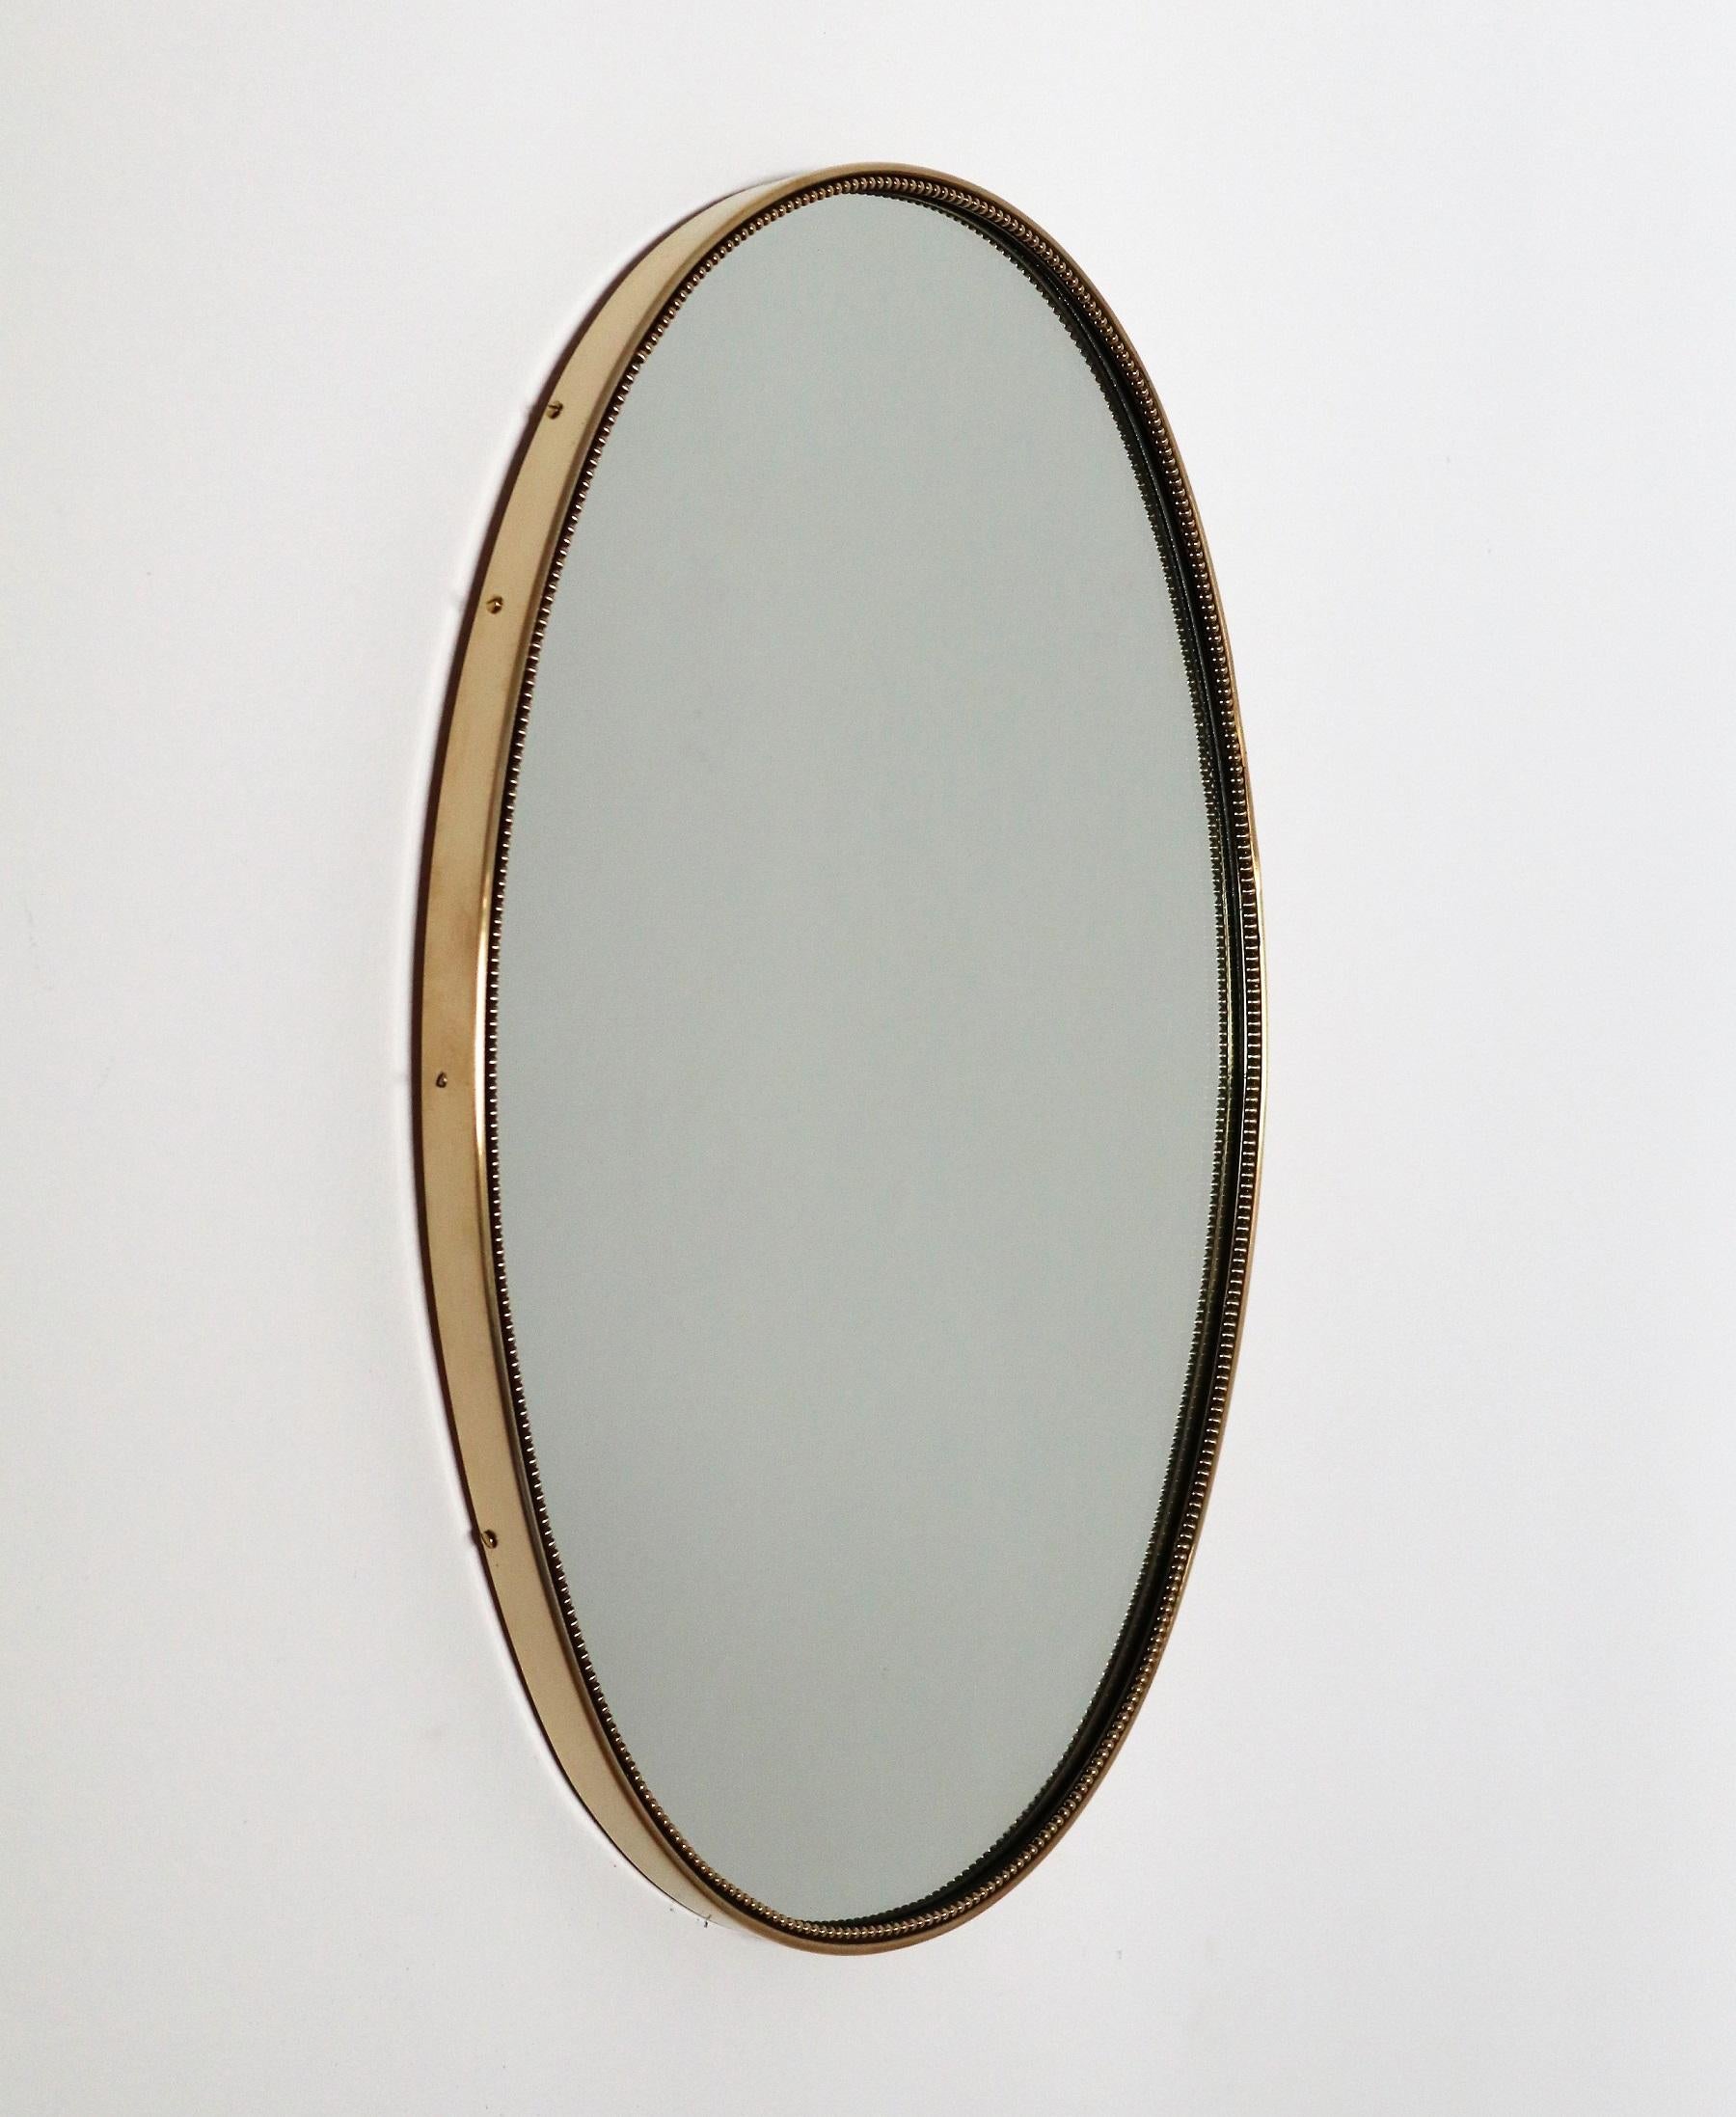 Beautiful and heavy oval wall mirror with brass frame with decors from Italian production of the 1960s.
The crystal glass is in original condition, no defects or chips on the glass.
The mirror is equipped with strong wooden back plate and hook for